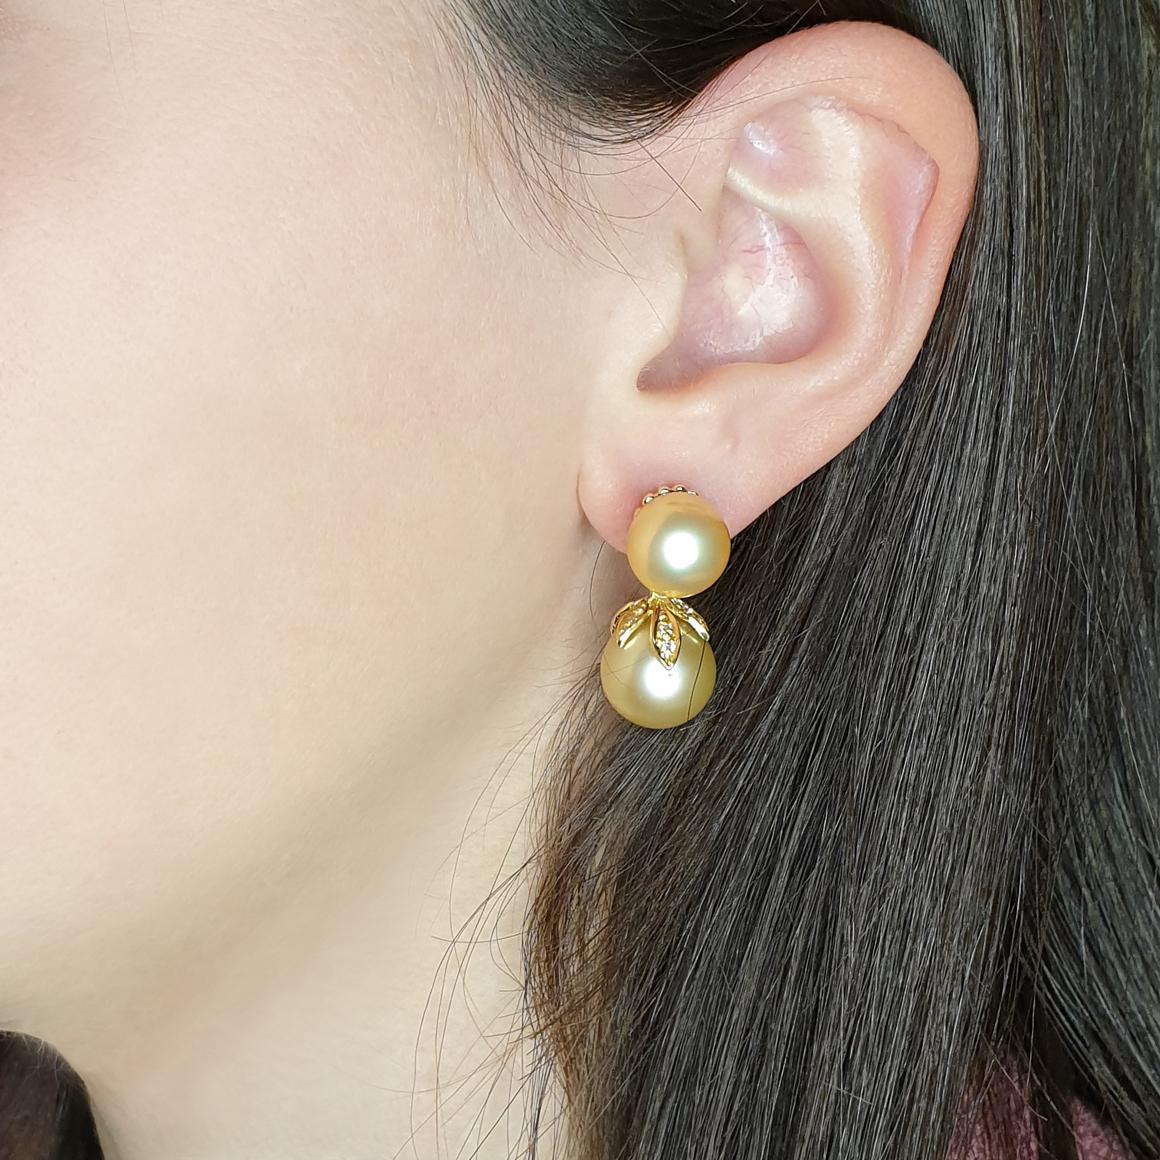 Classic and fashion Earrings in 18k yellow gold with Golden Pearls (10 and 12 mm) and white Diamonds cts 0.20 VS colour G/H.  Handemade in Italy by Stanoppi Jewellery since 1948

(Possibility to have ring in set)   g.13.50

Item